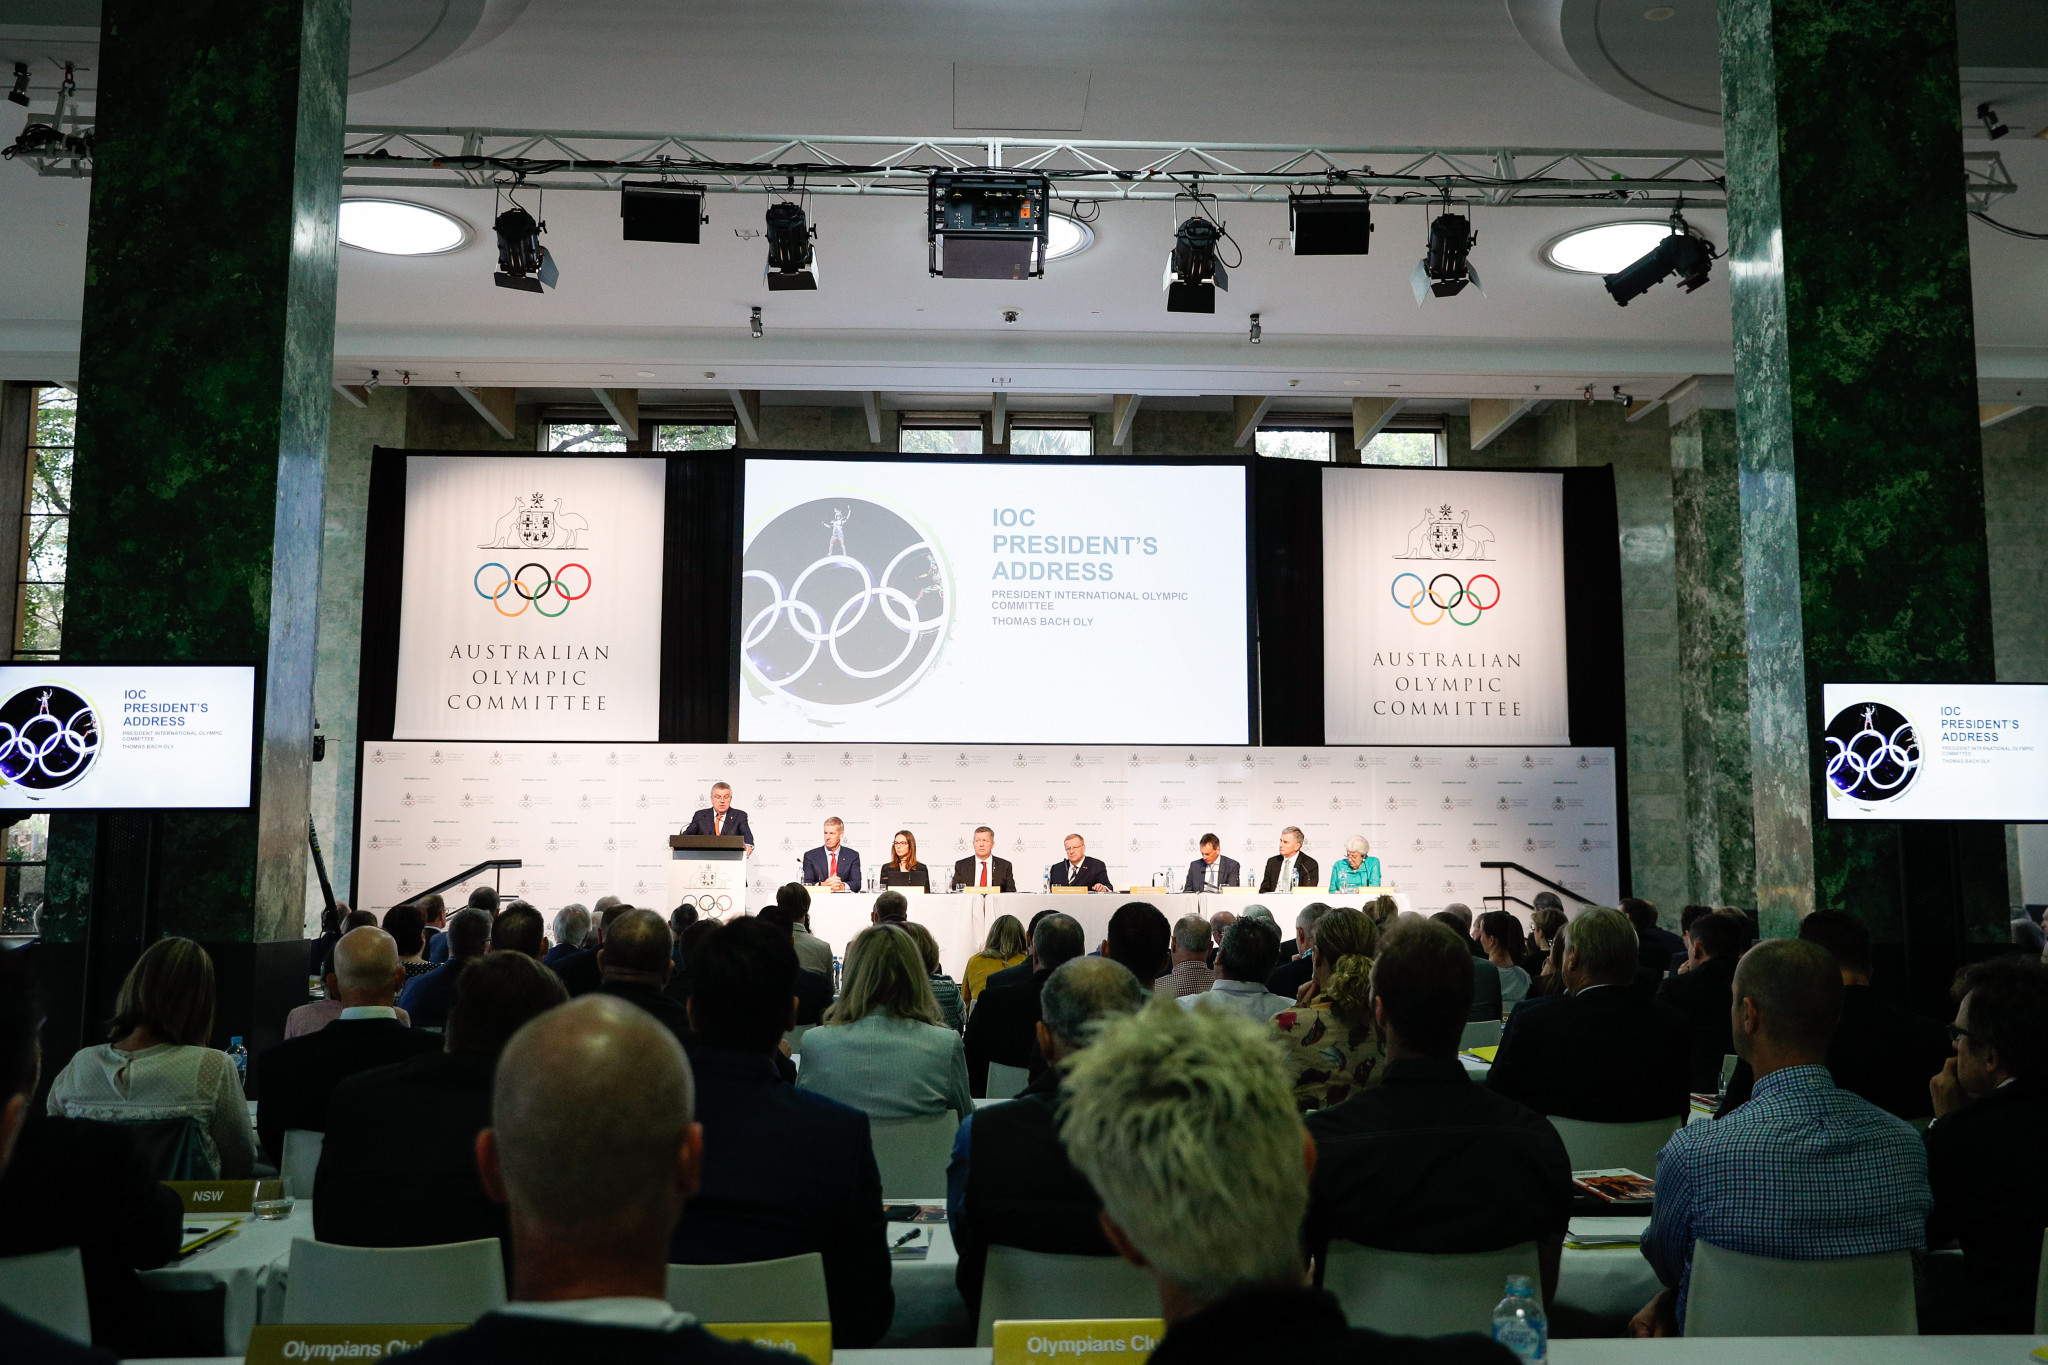 IOC President Thomas Bach told the audience at the Australian Olympic Committee Annual General Meeting he wanted to avoid a bid process where there were 